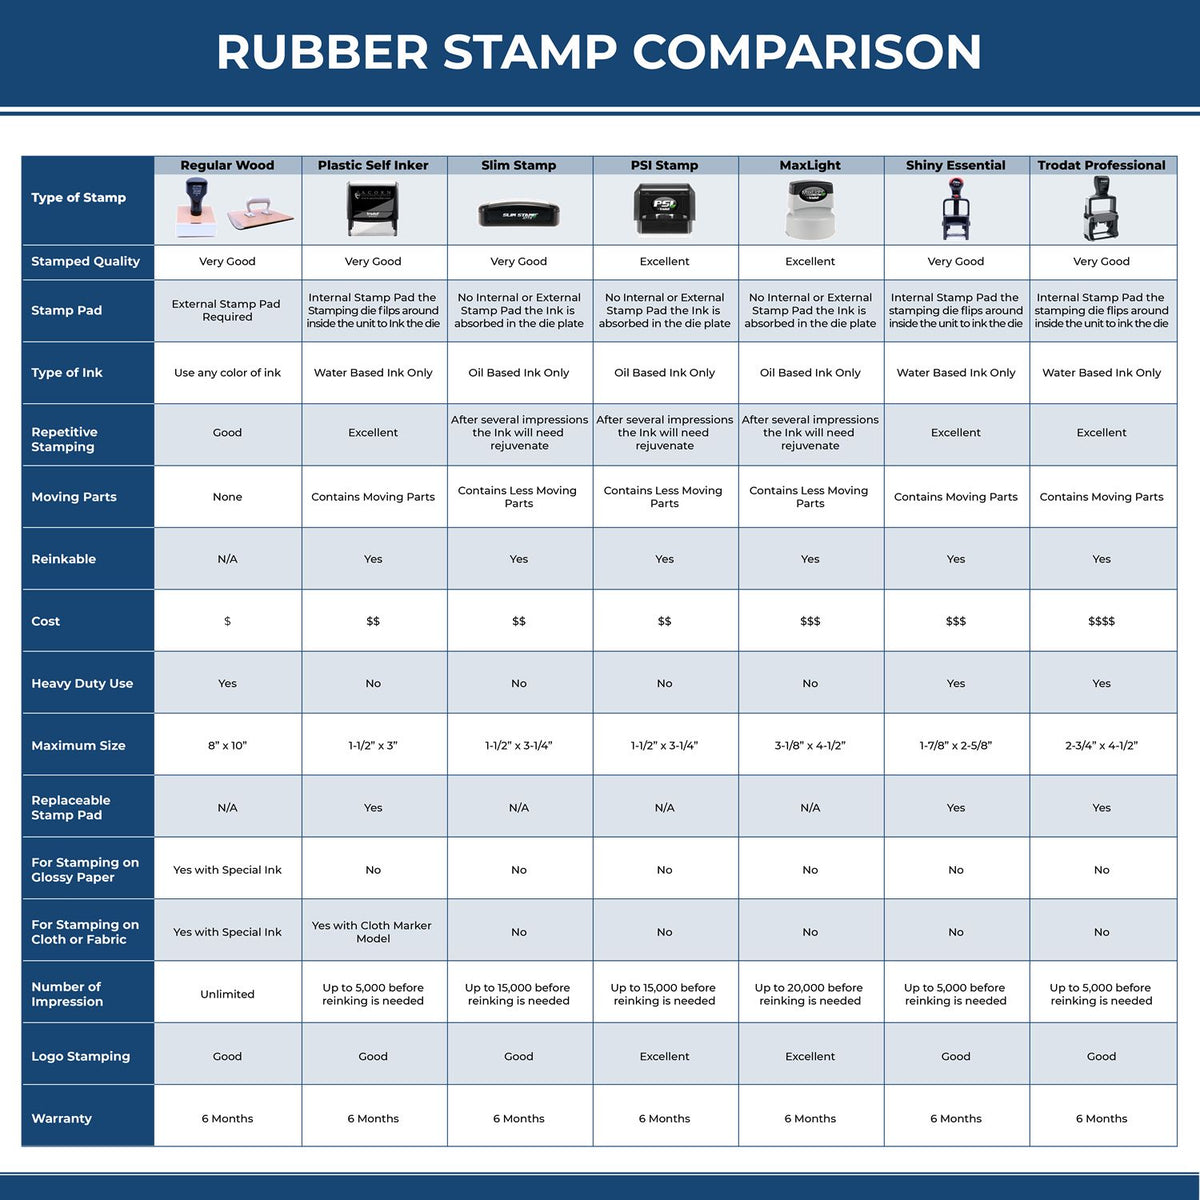 A comparison chart for the different types of mount models available for the Premium MaxLight Pre-Inked Alabama Engineering Stamp.